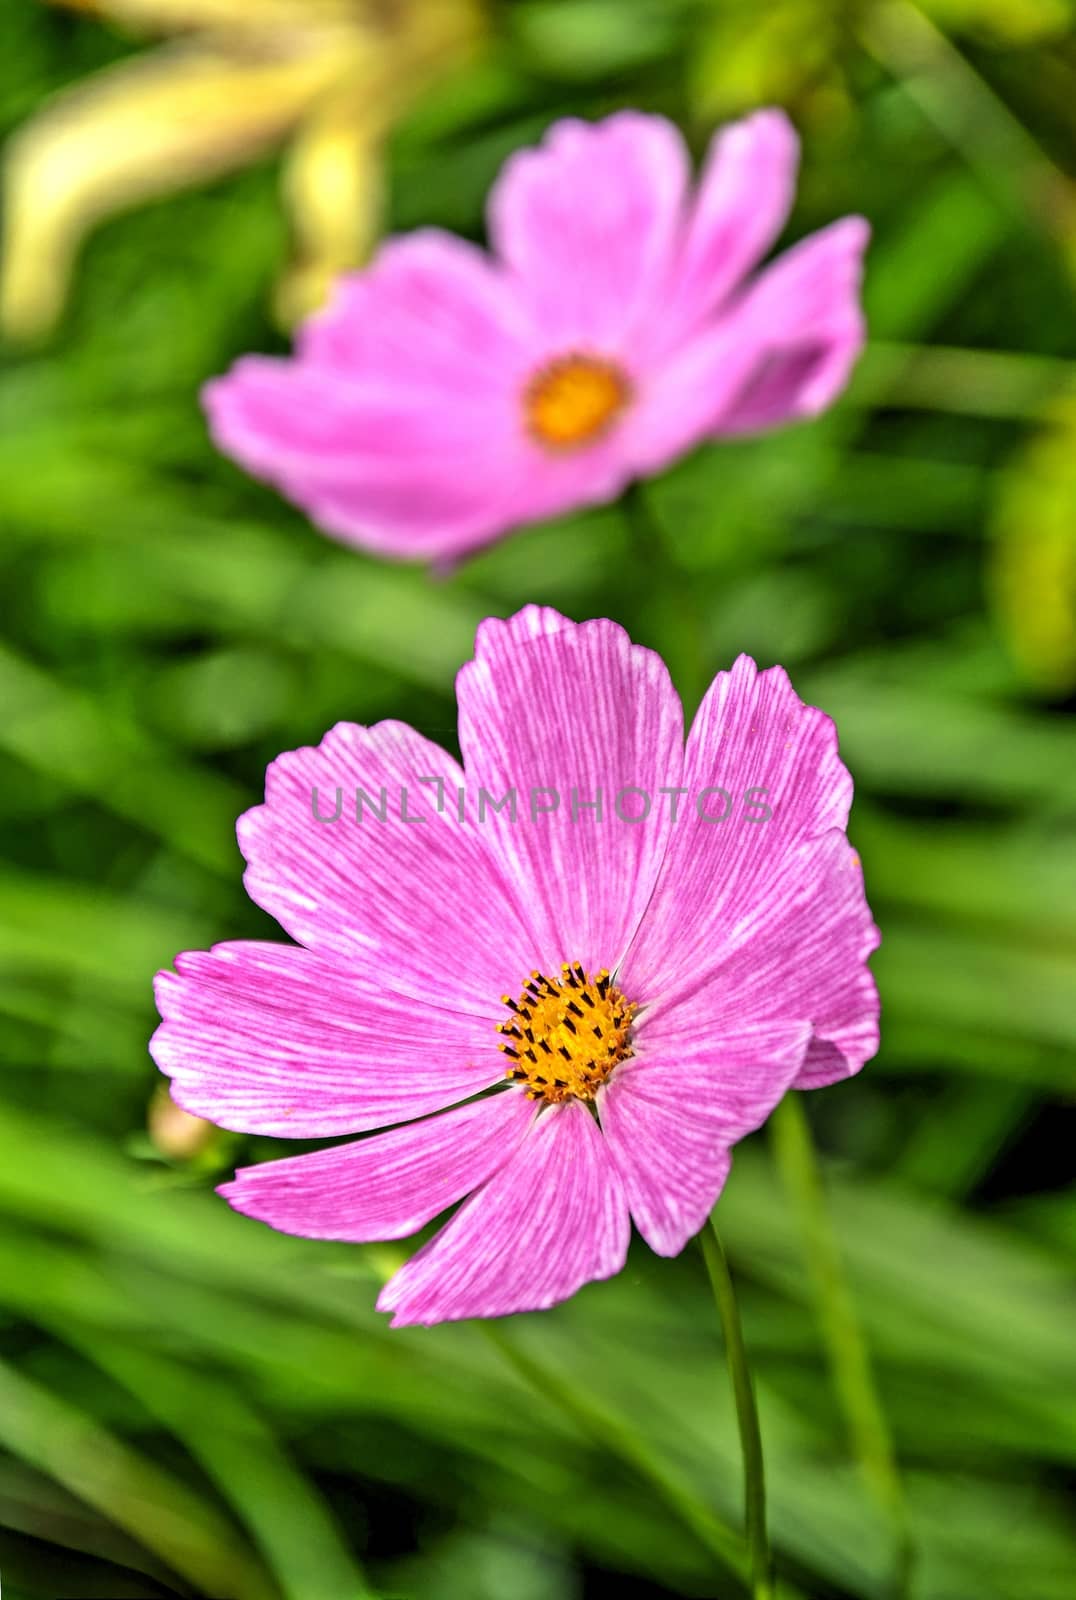 Two pink cosmos or mexican aster (cosmos bipinnnatus) flowers close up taken on a blurry green background.